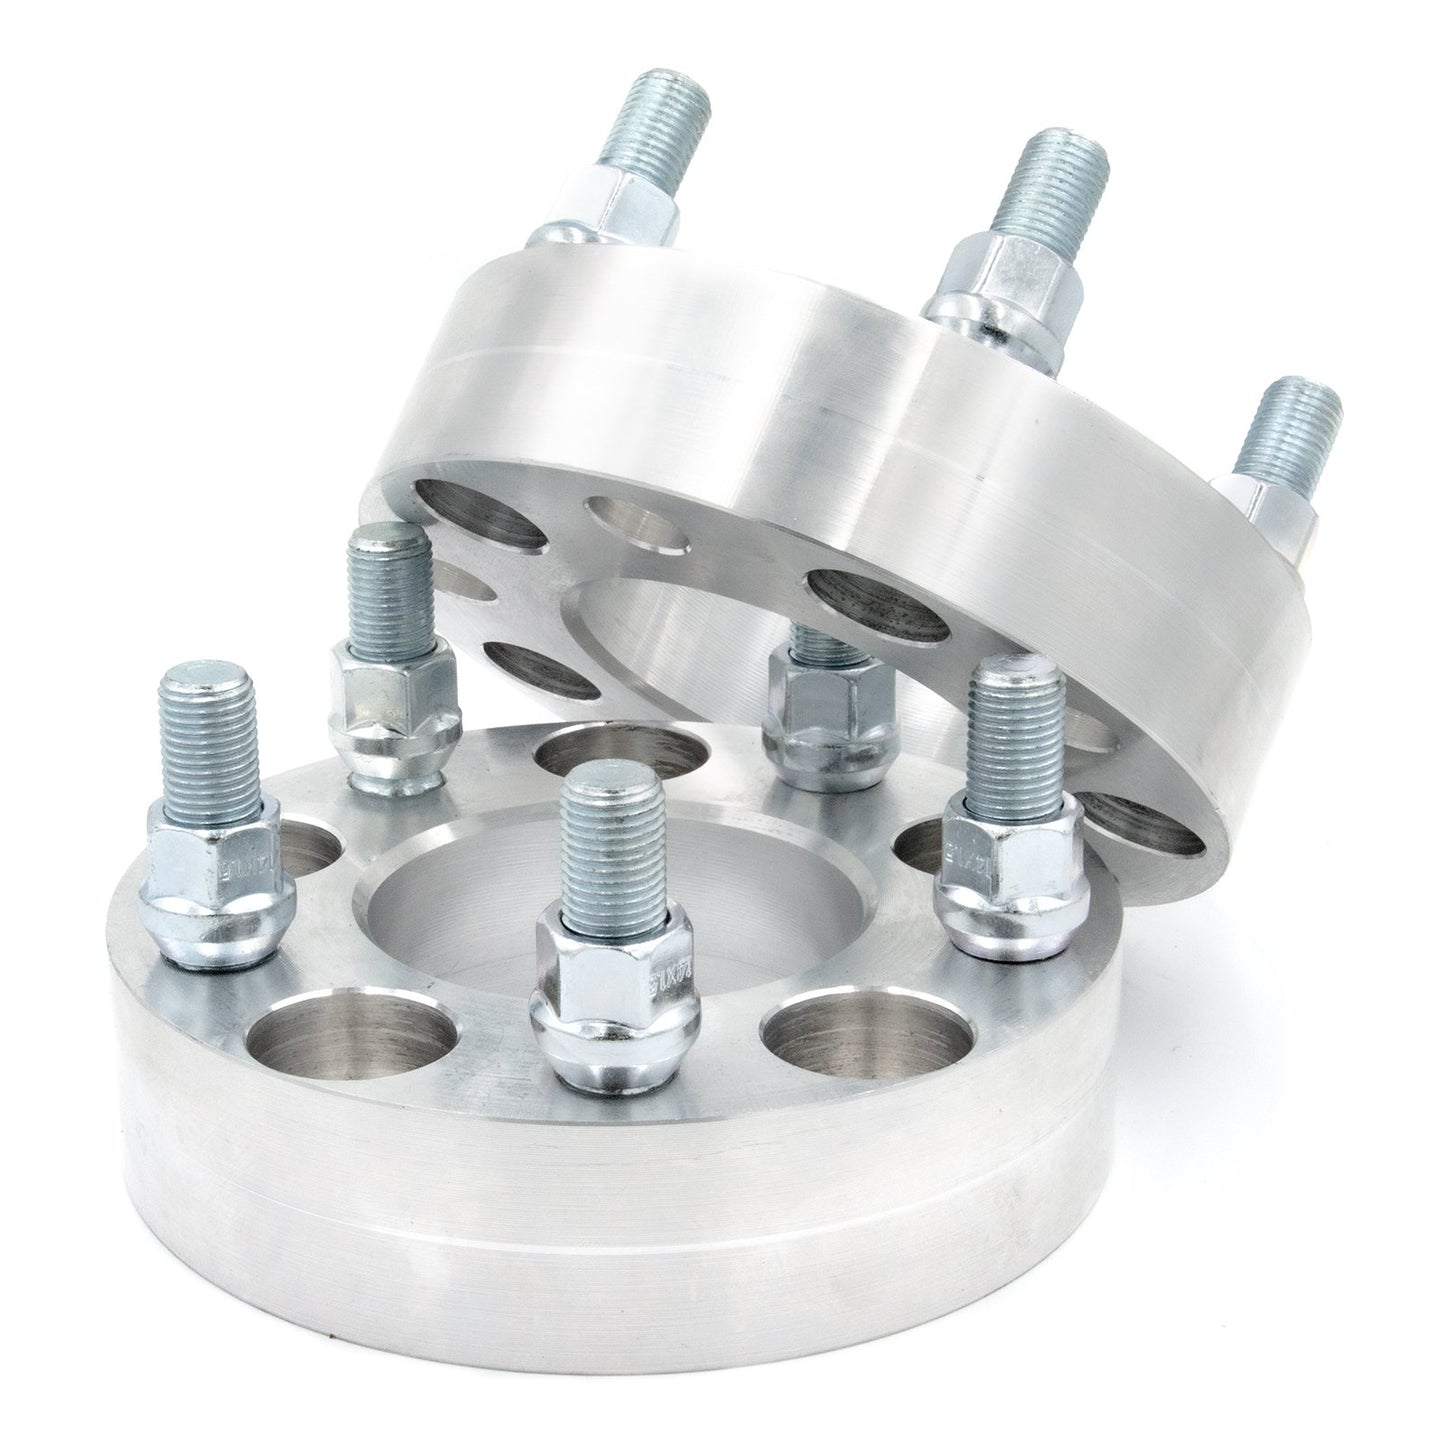 5x98 to 5x120 Wheel Spacer/Adapter - Thickness: 3/4"- 4"